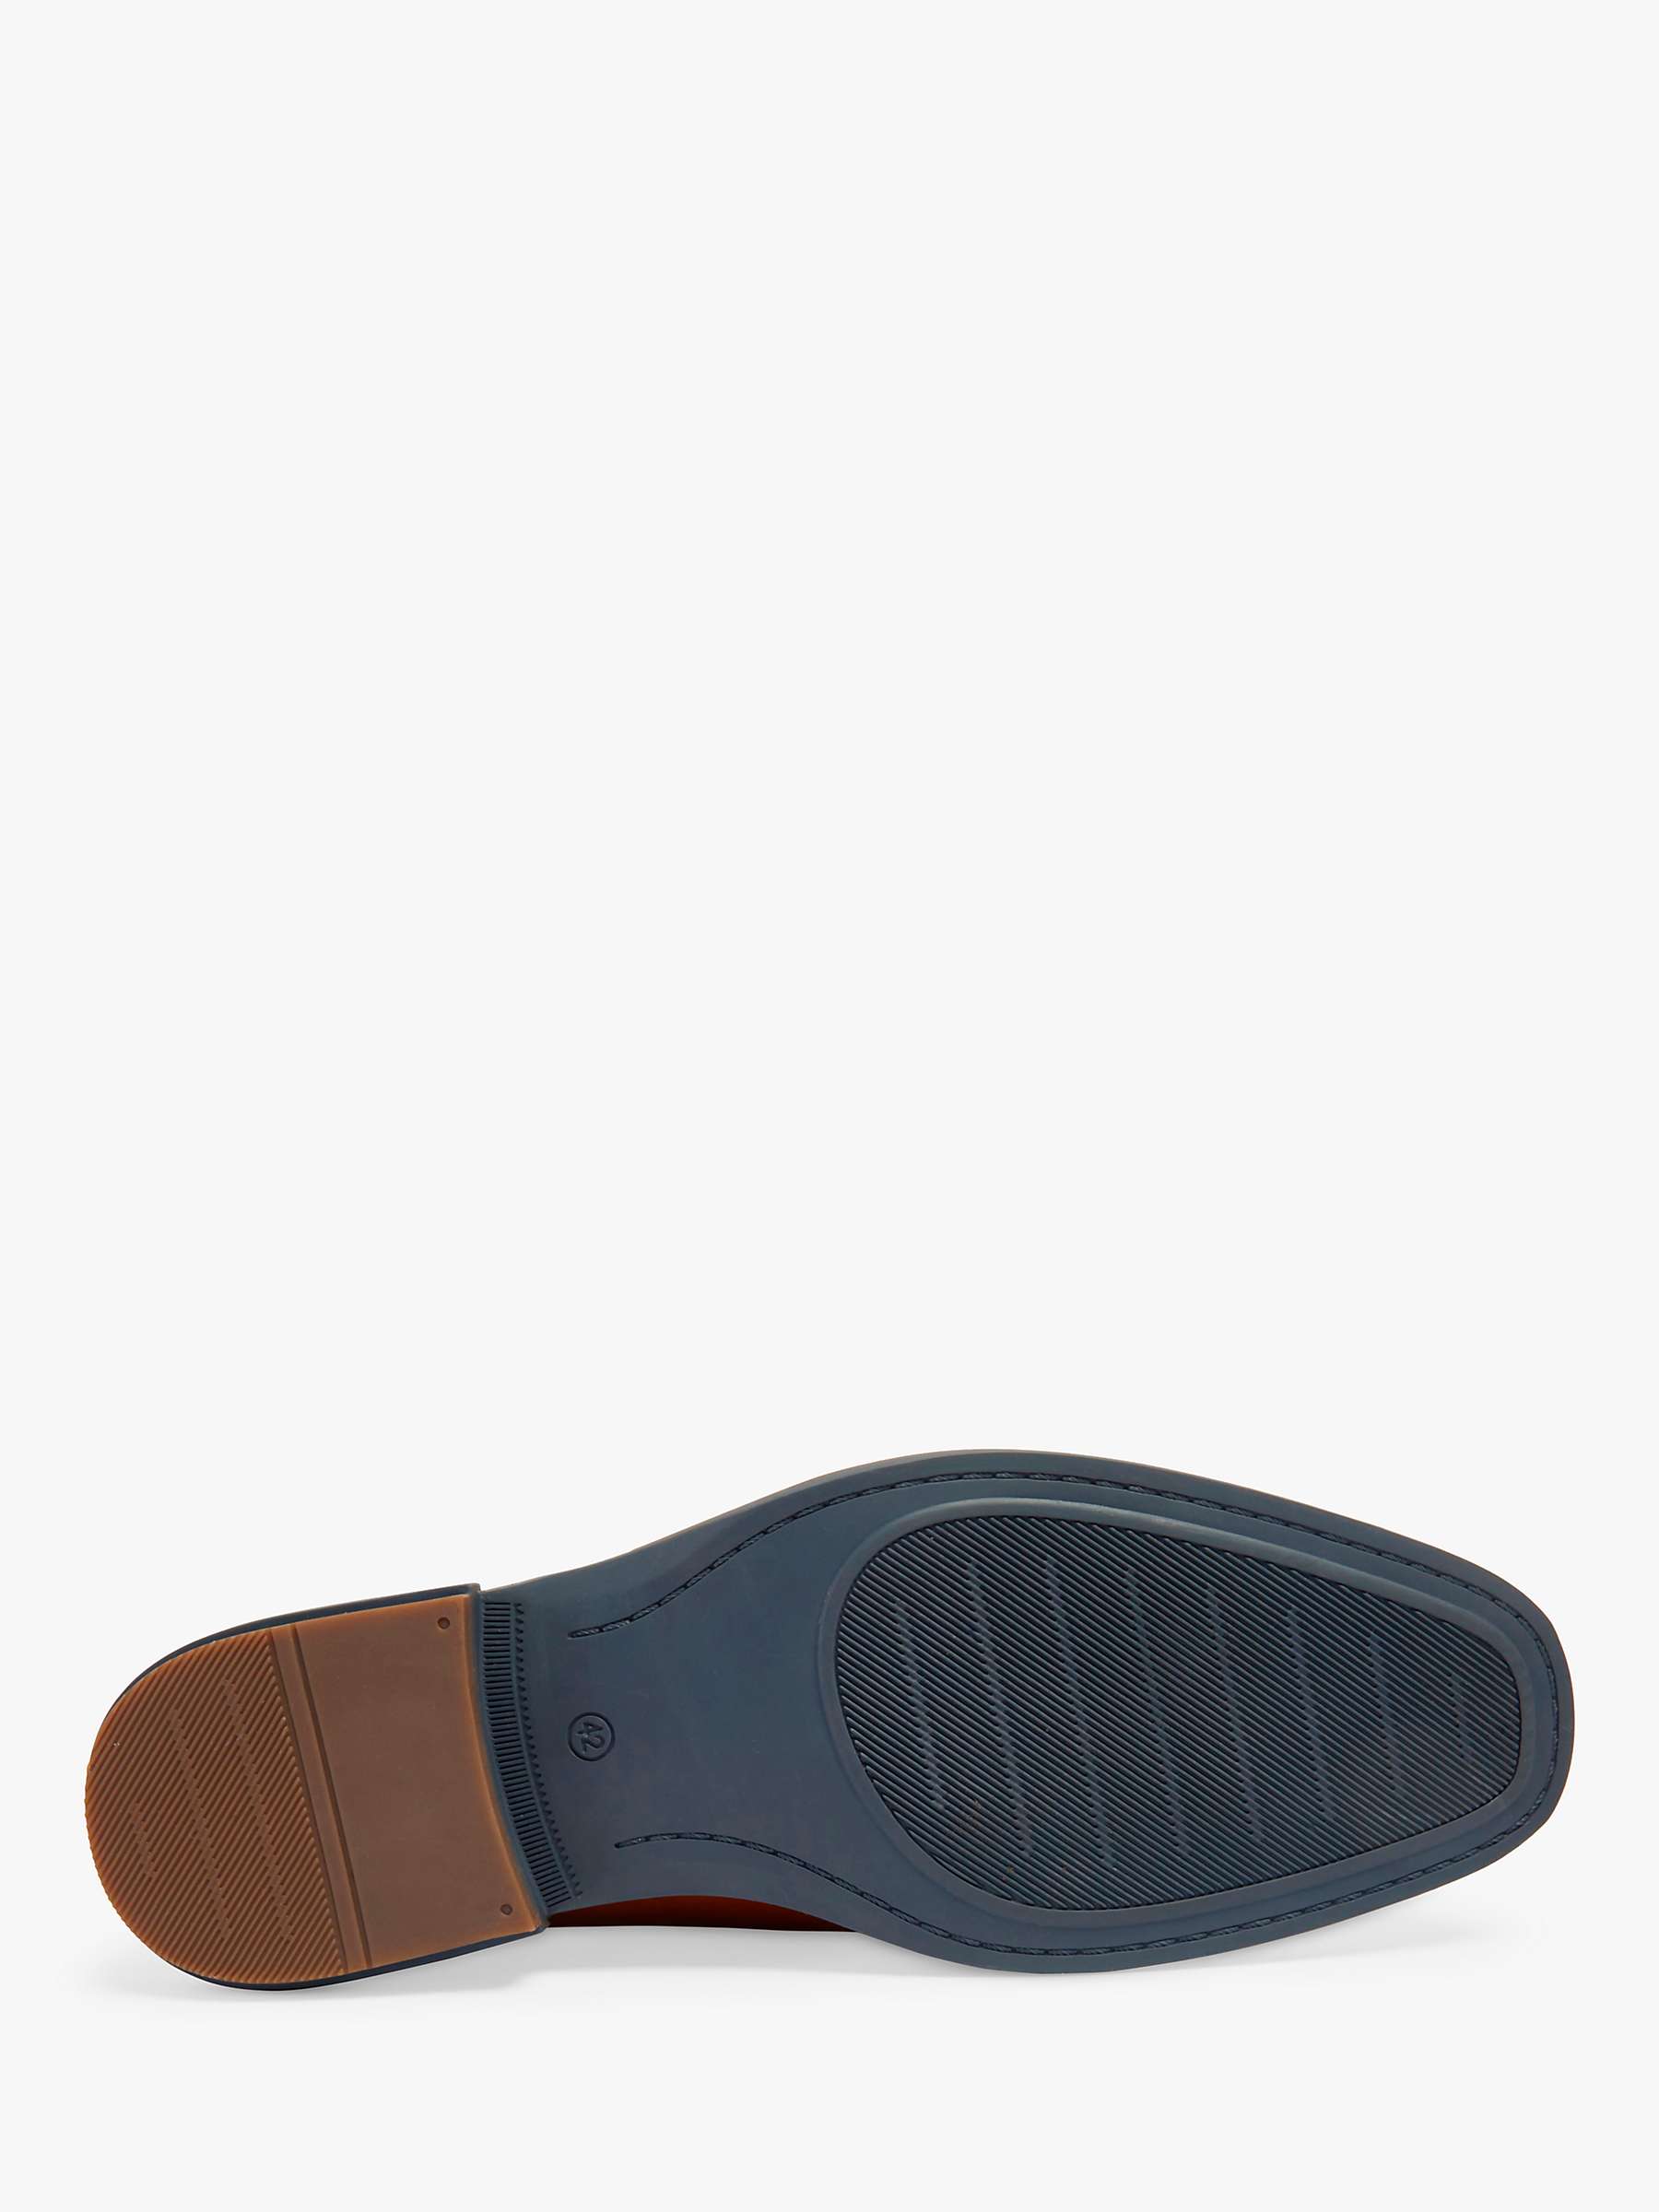 Buy Pod Spear Leather Loafers Online at johnlewis.com